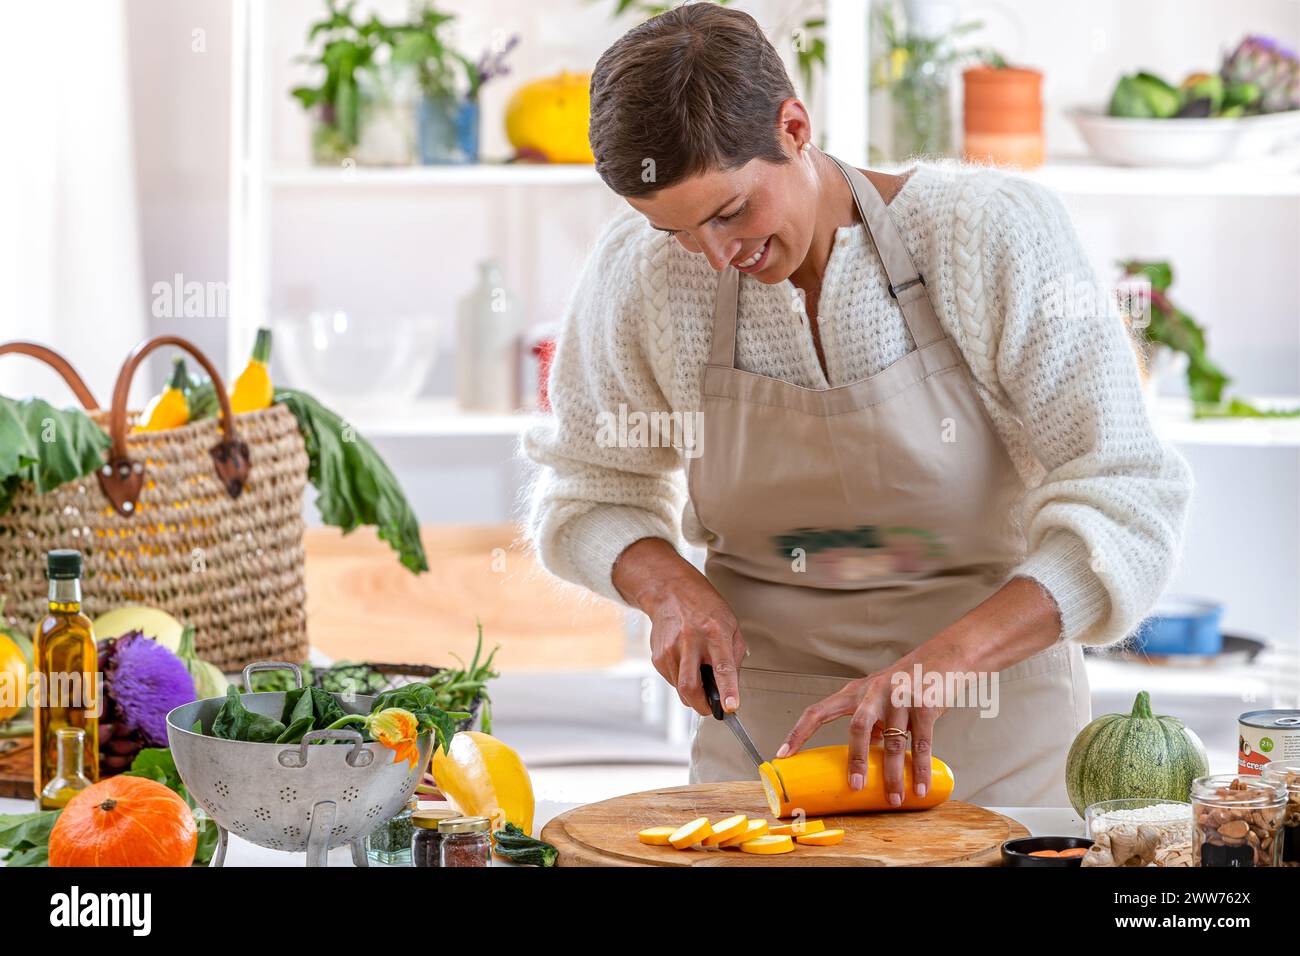 Young woman in her kitchen surrounded by organic vegetables. Stock Photo